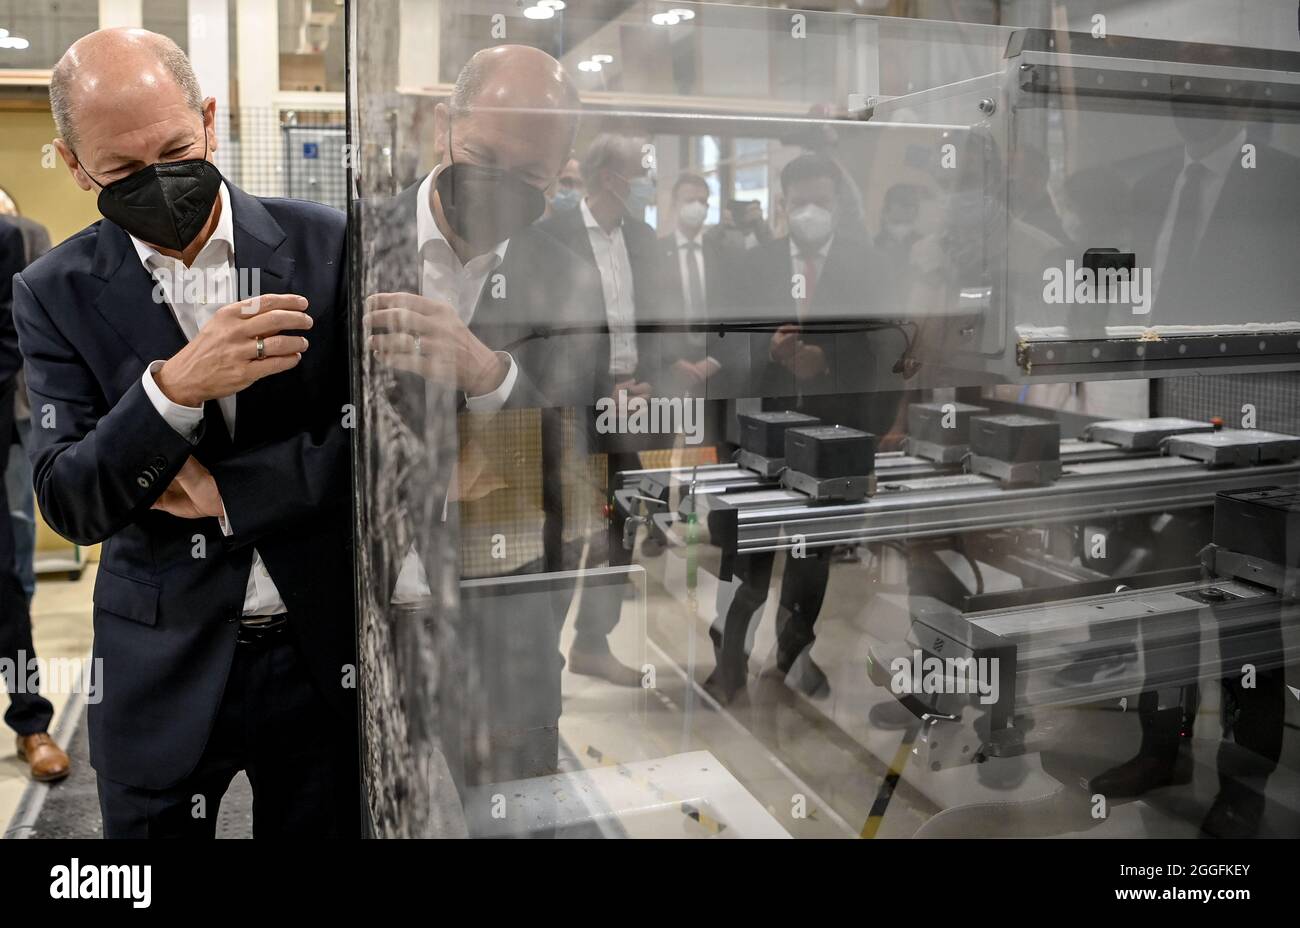 Potsdam, Germany. 31st Aug, 2021. Olaf Scholz (SPD), candidate for the German chancellorship, looks at a machine in the workshop of the training centre Oberlin Berufliche Schulen. Credit: Britta Pedersen/dpa-Zentralbild/dpa/Alamy Live News Stock Photo